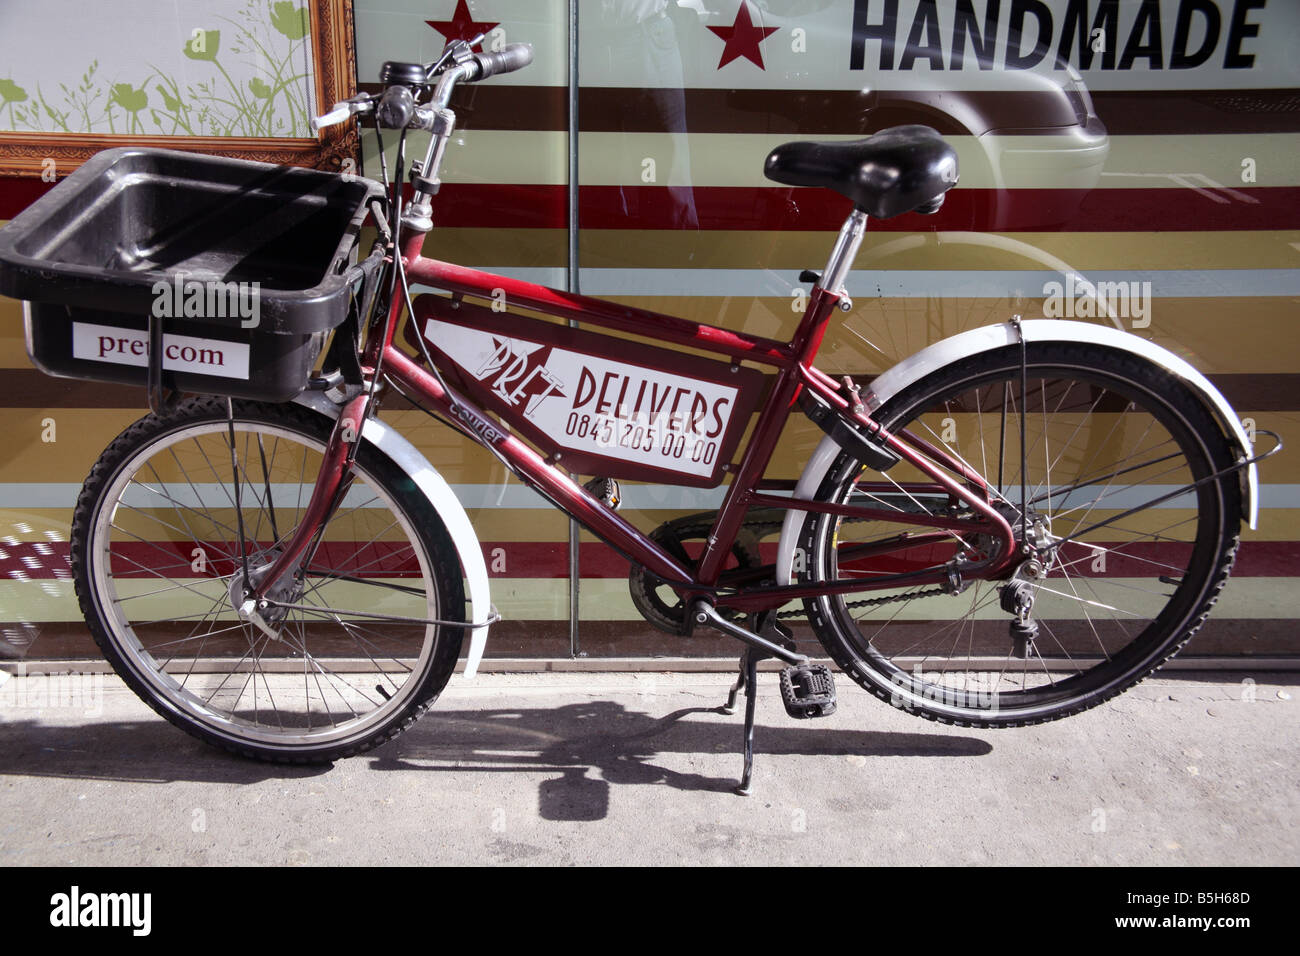 Pret A Manger delivery bicycle London Stock Photo